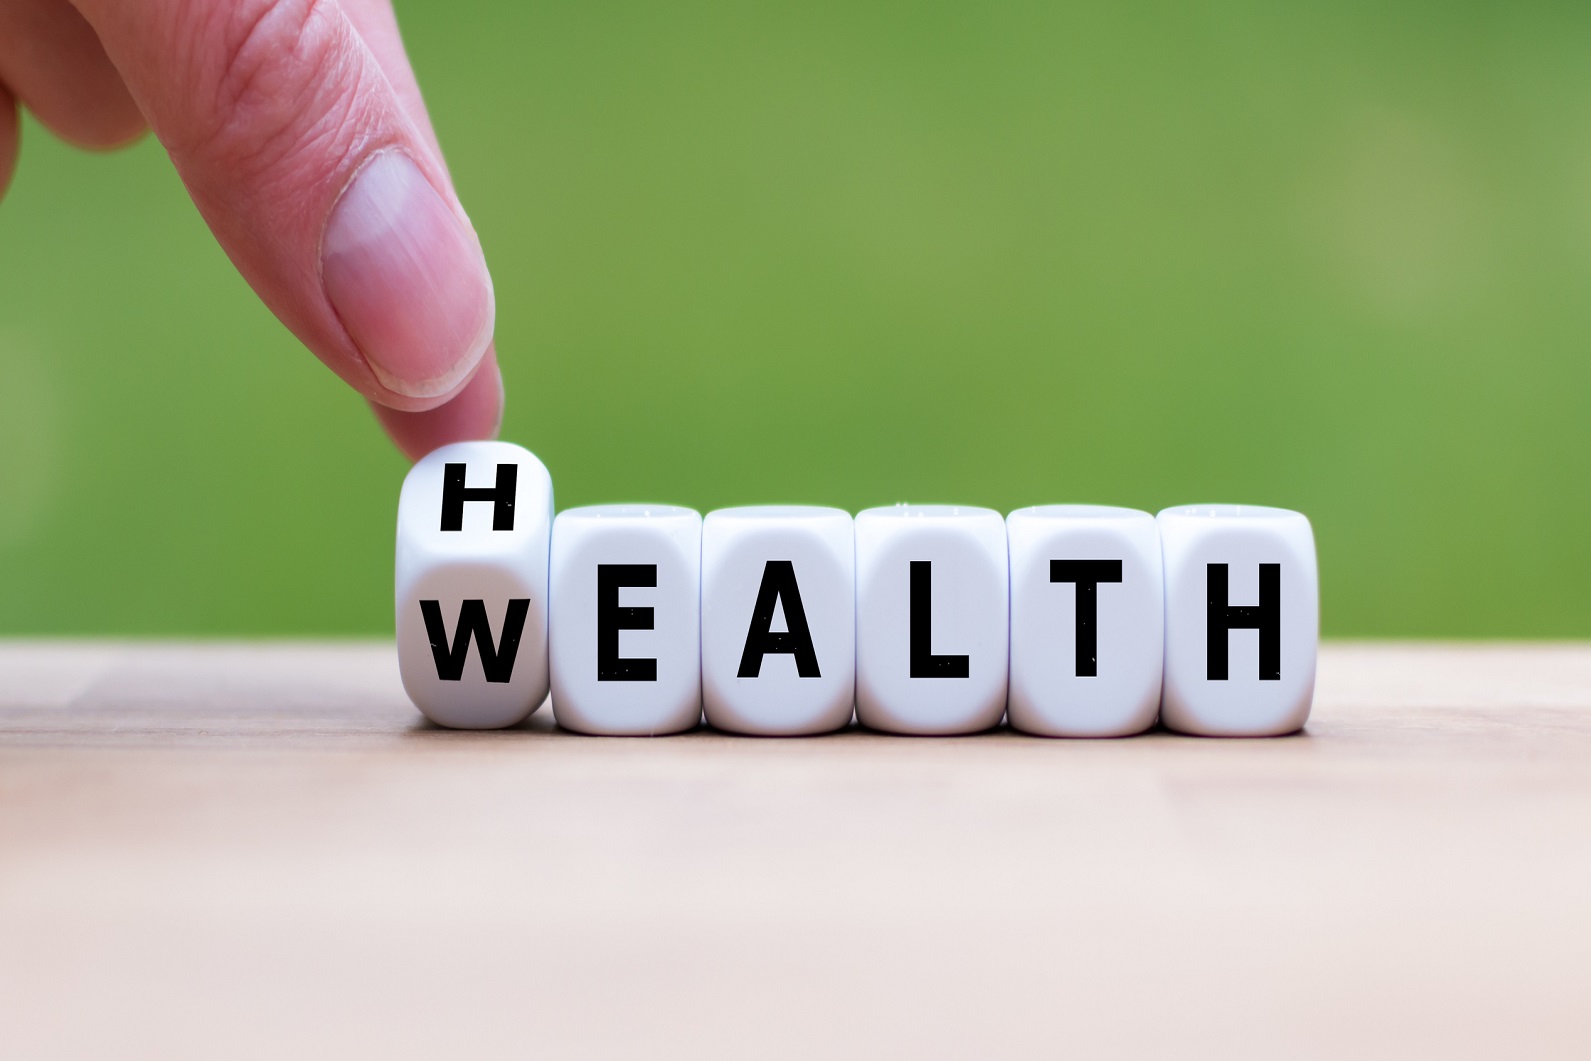 Hand turning dice changes the word "Health" to "Wealth"